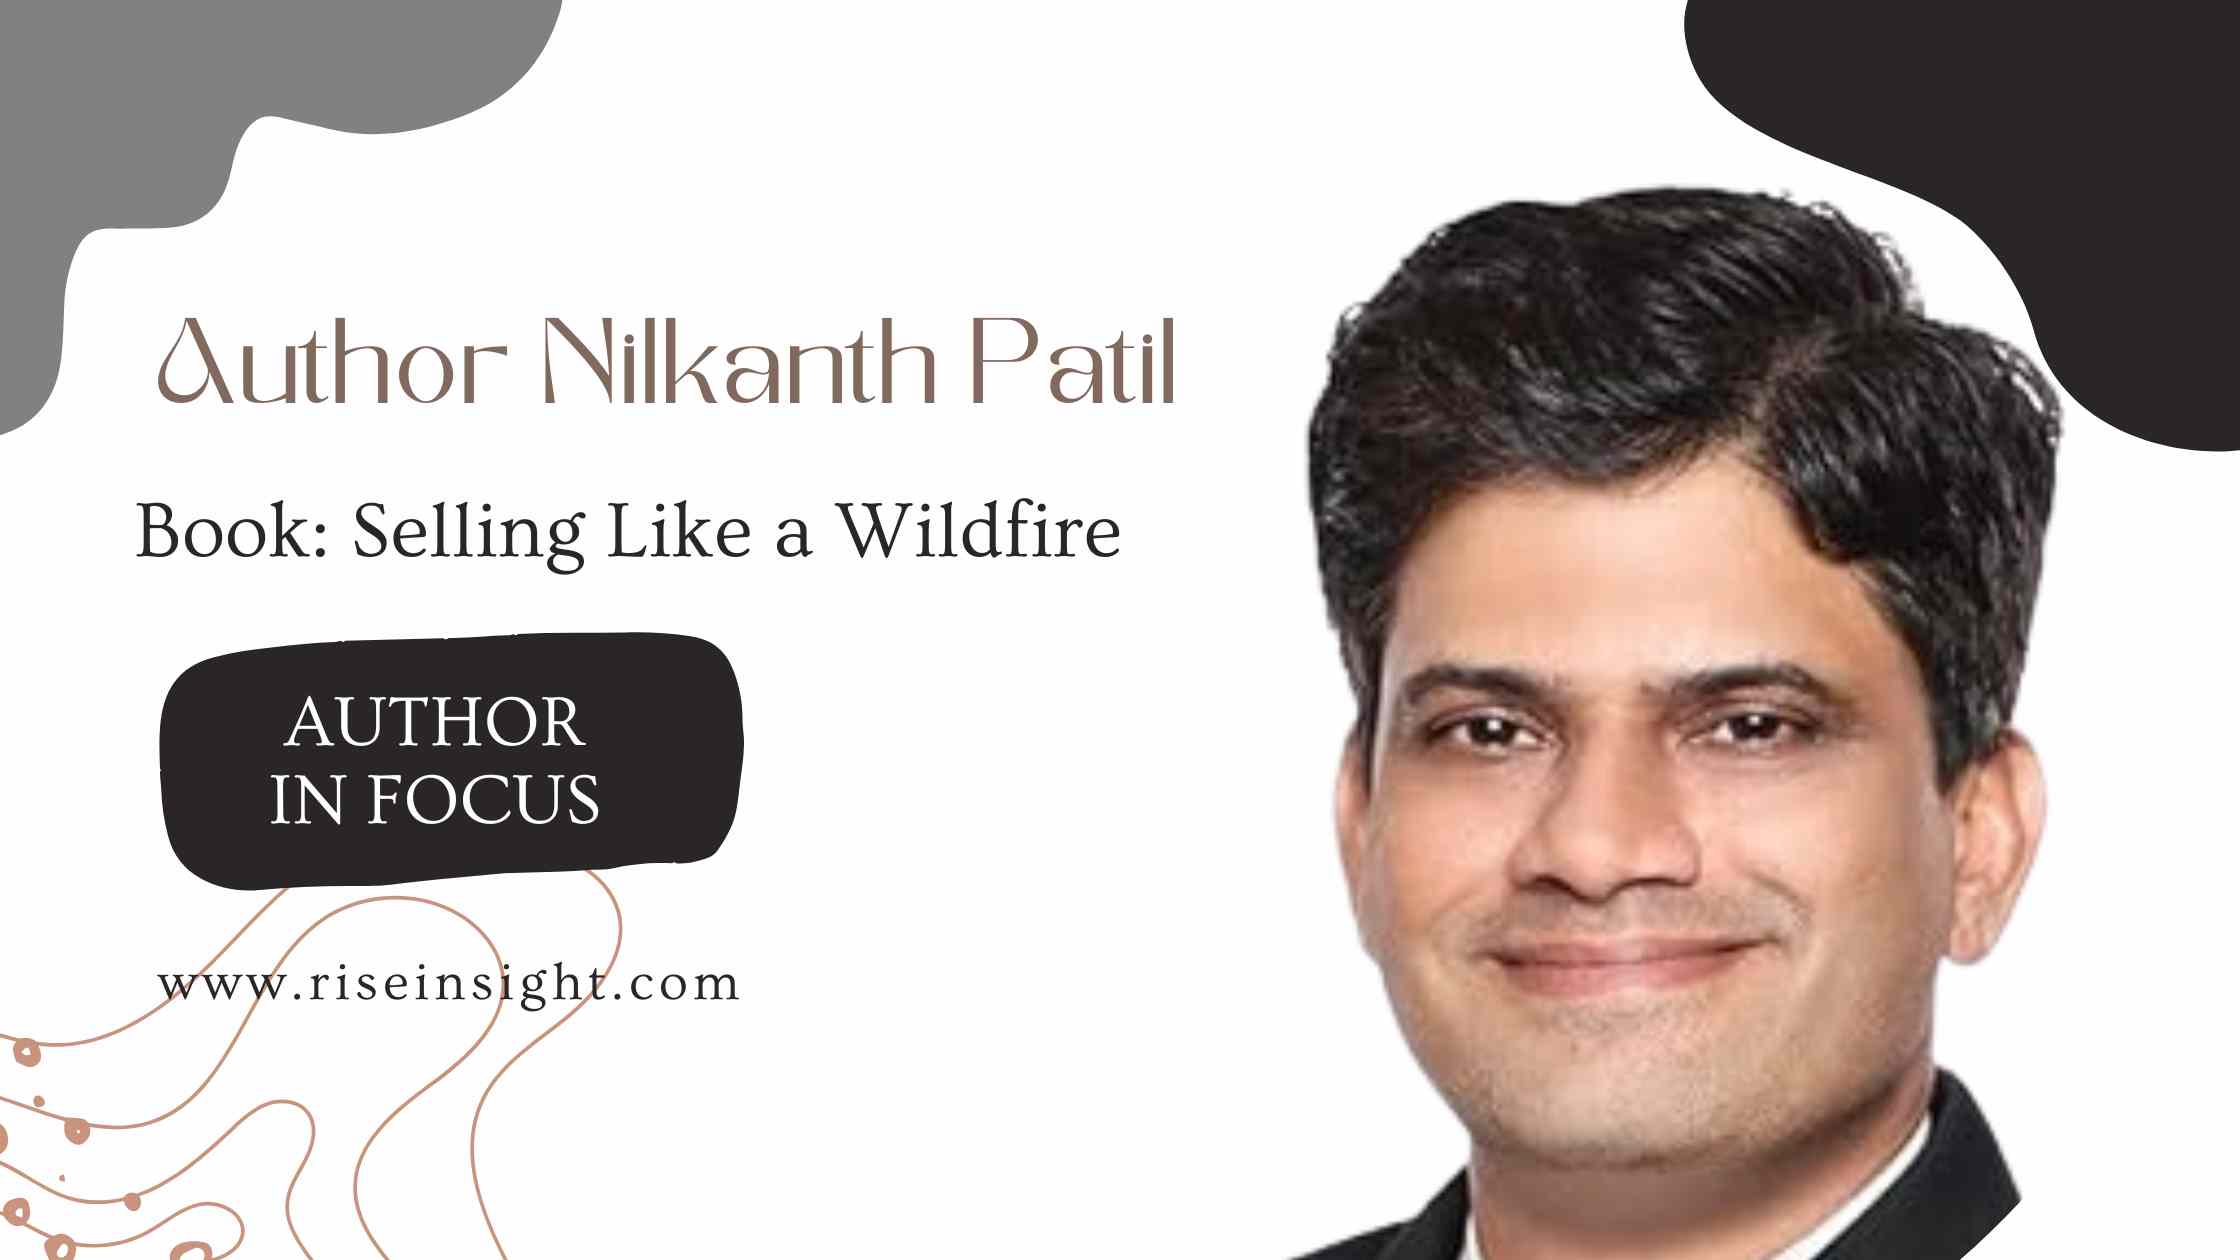 Author Nilkanth Patil Talks About His Book “Selling Like a Wildfire”